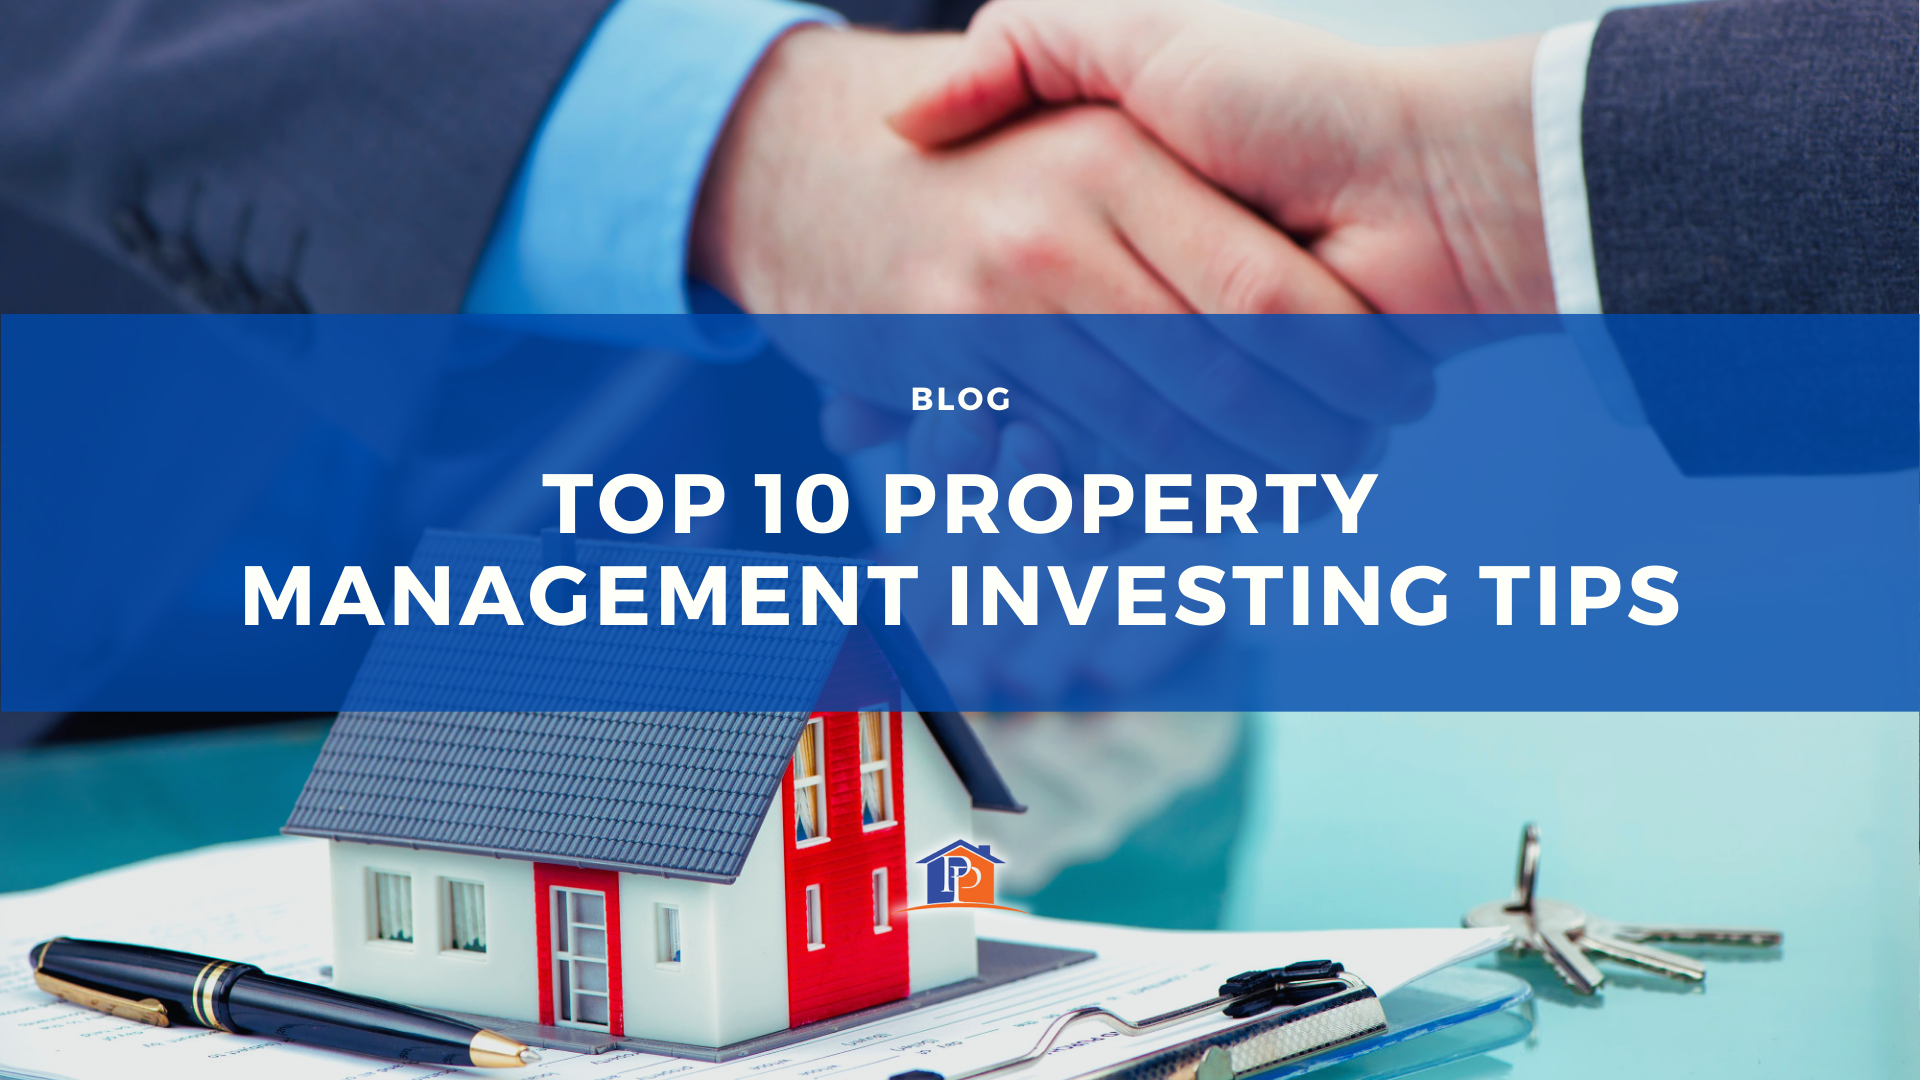 Top 10 Property Management Investing Tips